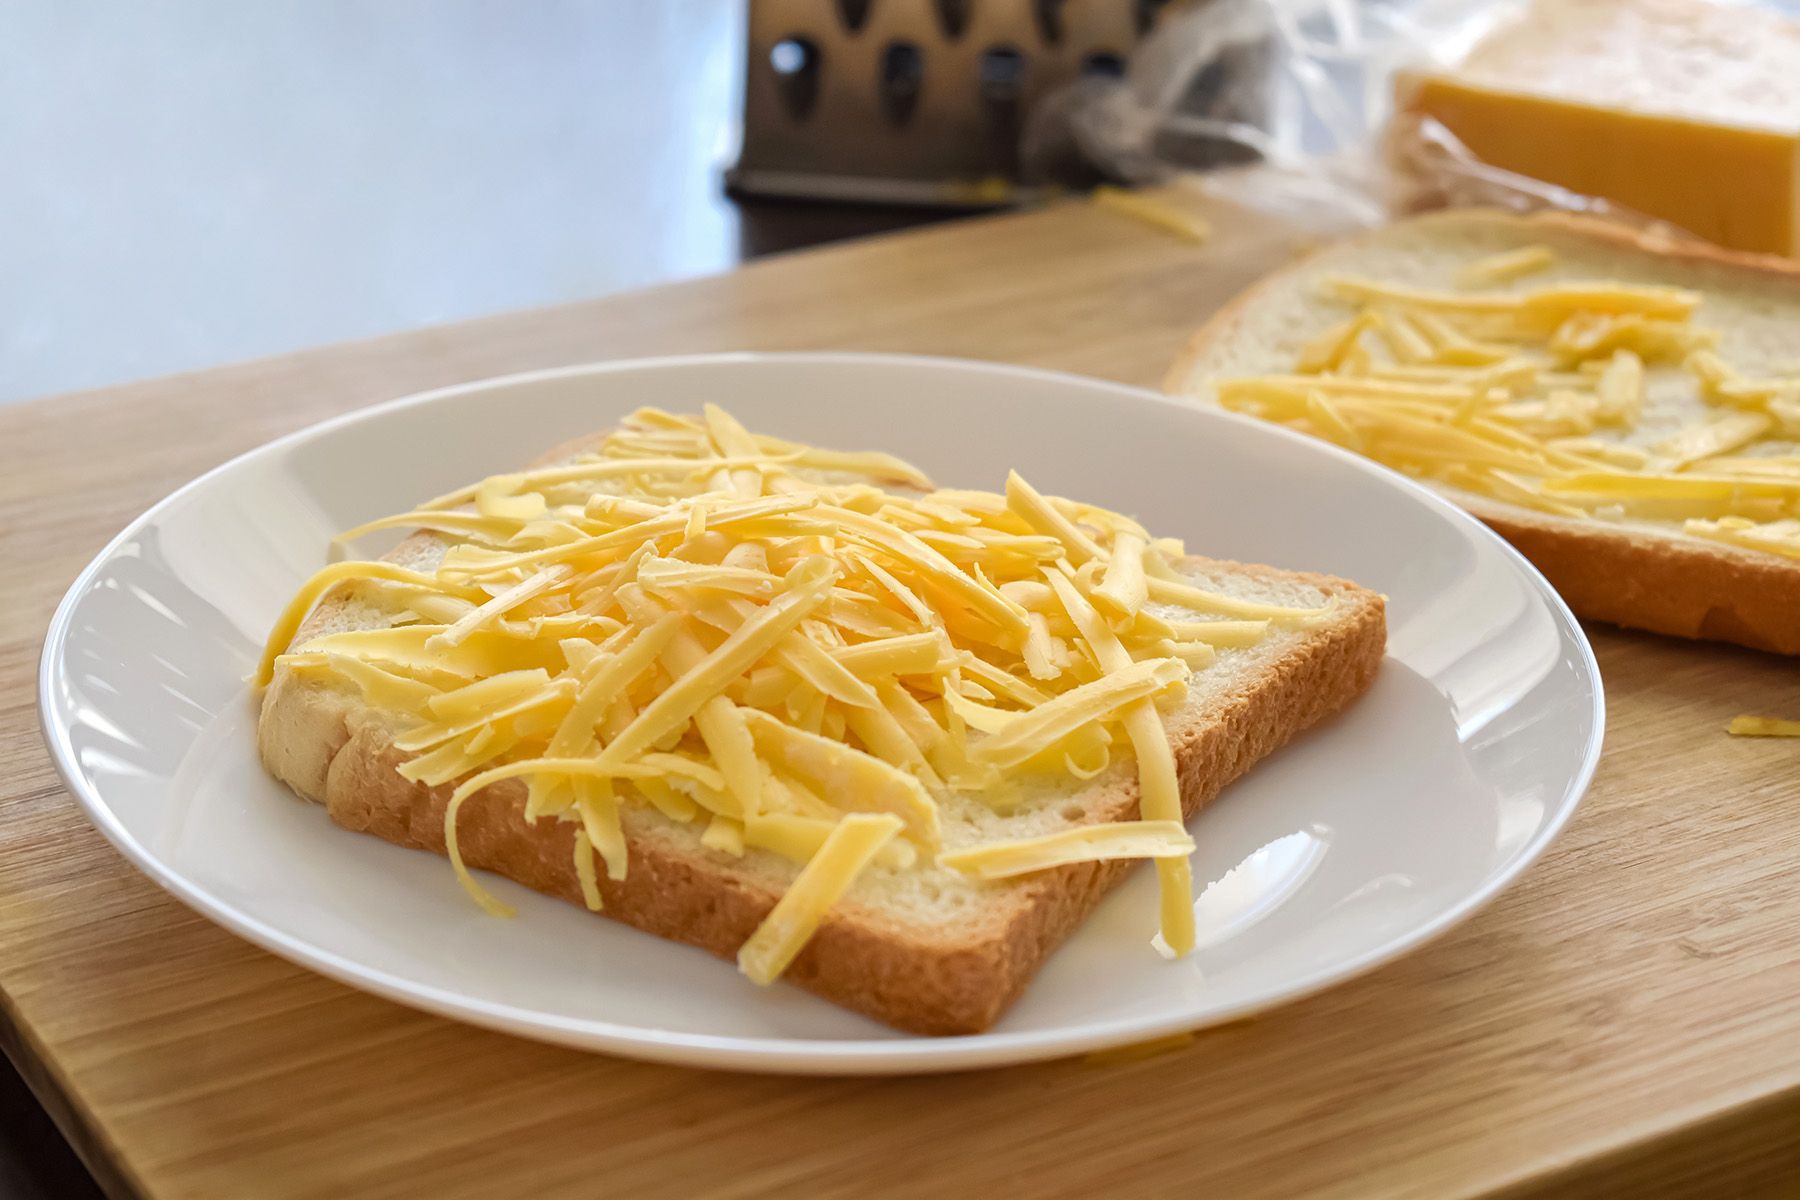 grated cheese for a sandwich